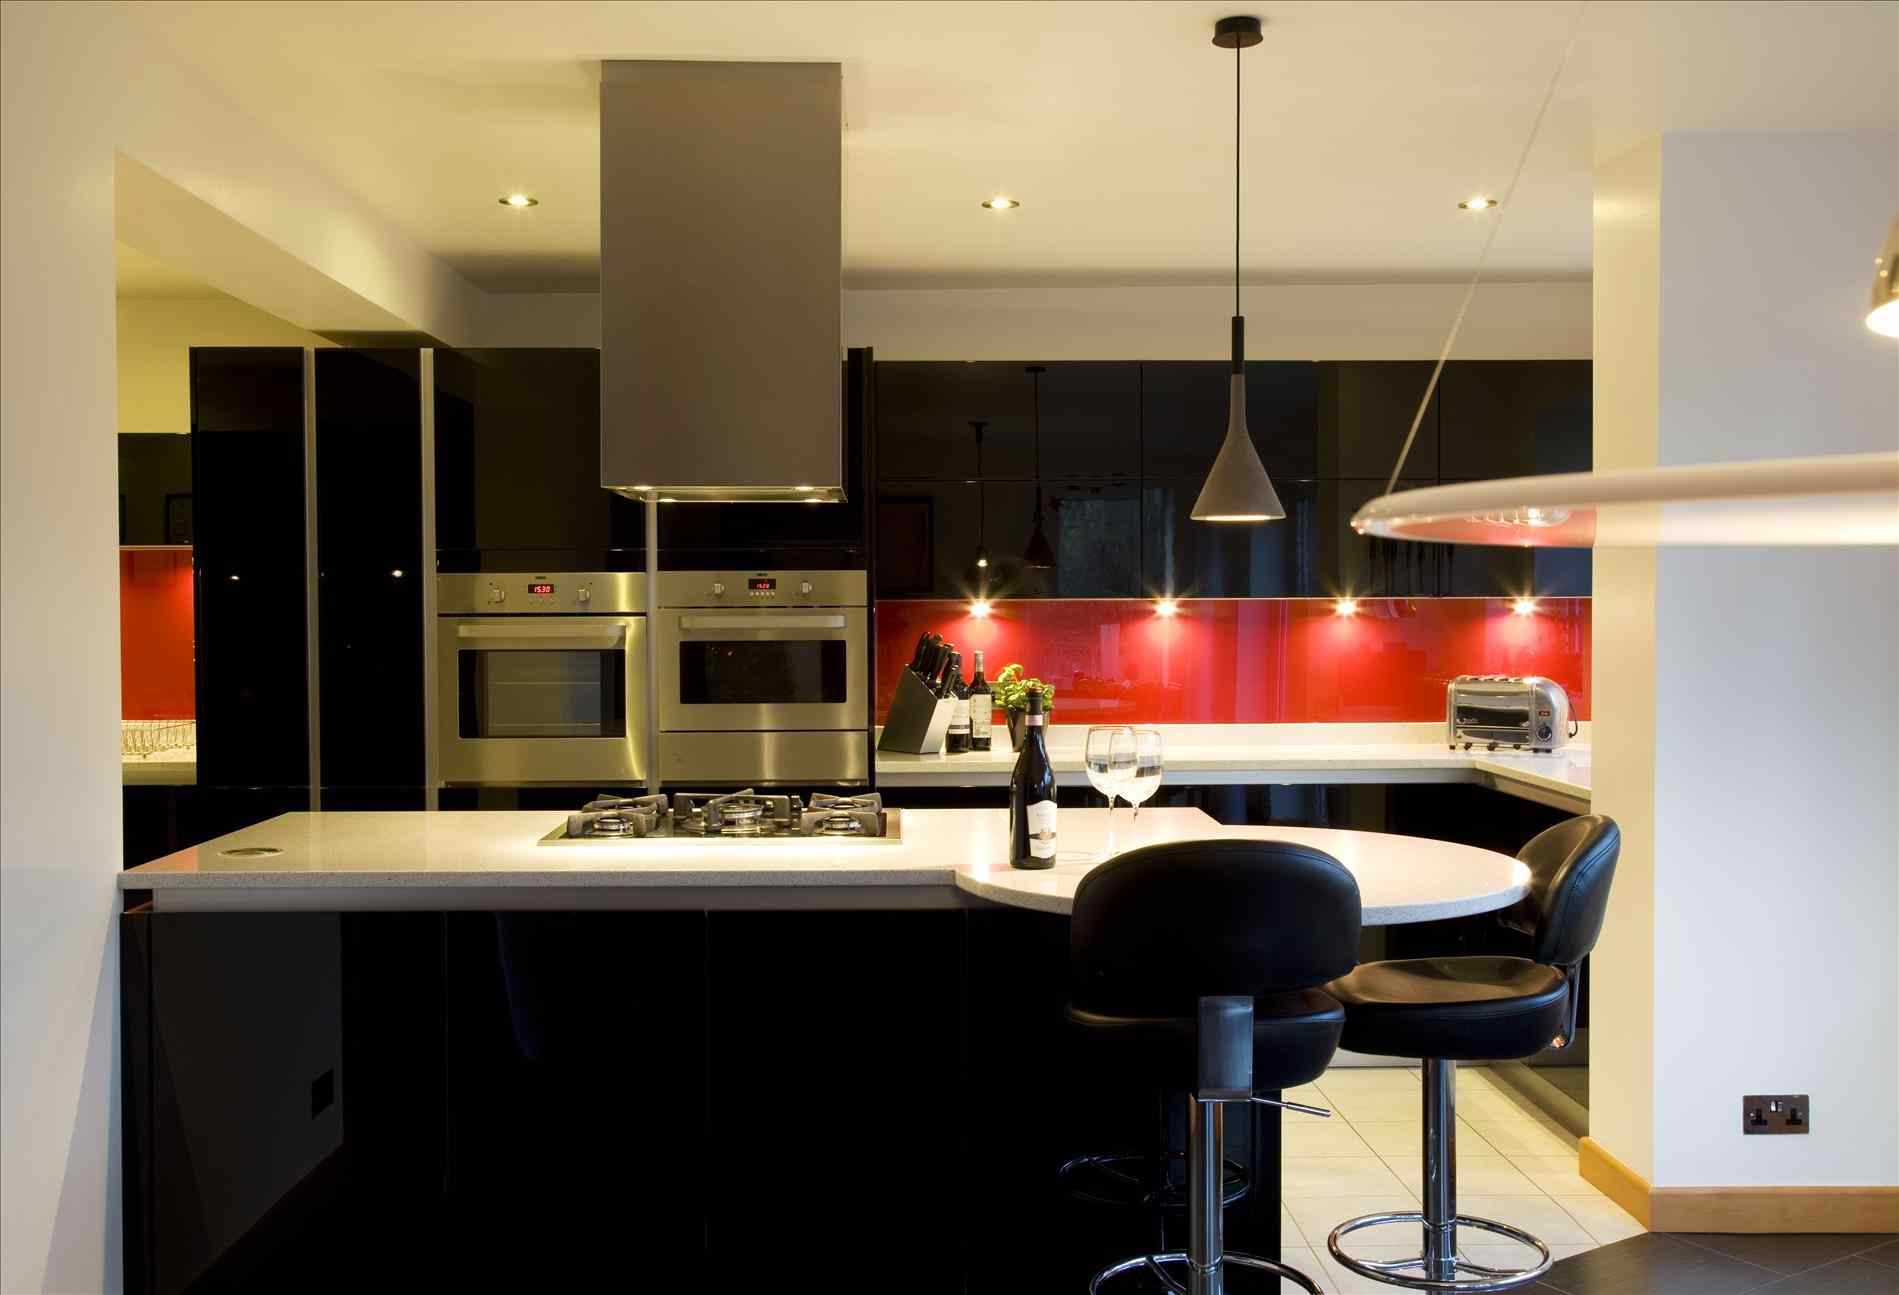 black and white kitchens with a splash of colour black and white kitchens with a splash colour phenomenl europen KGYNMQO